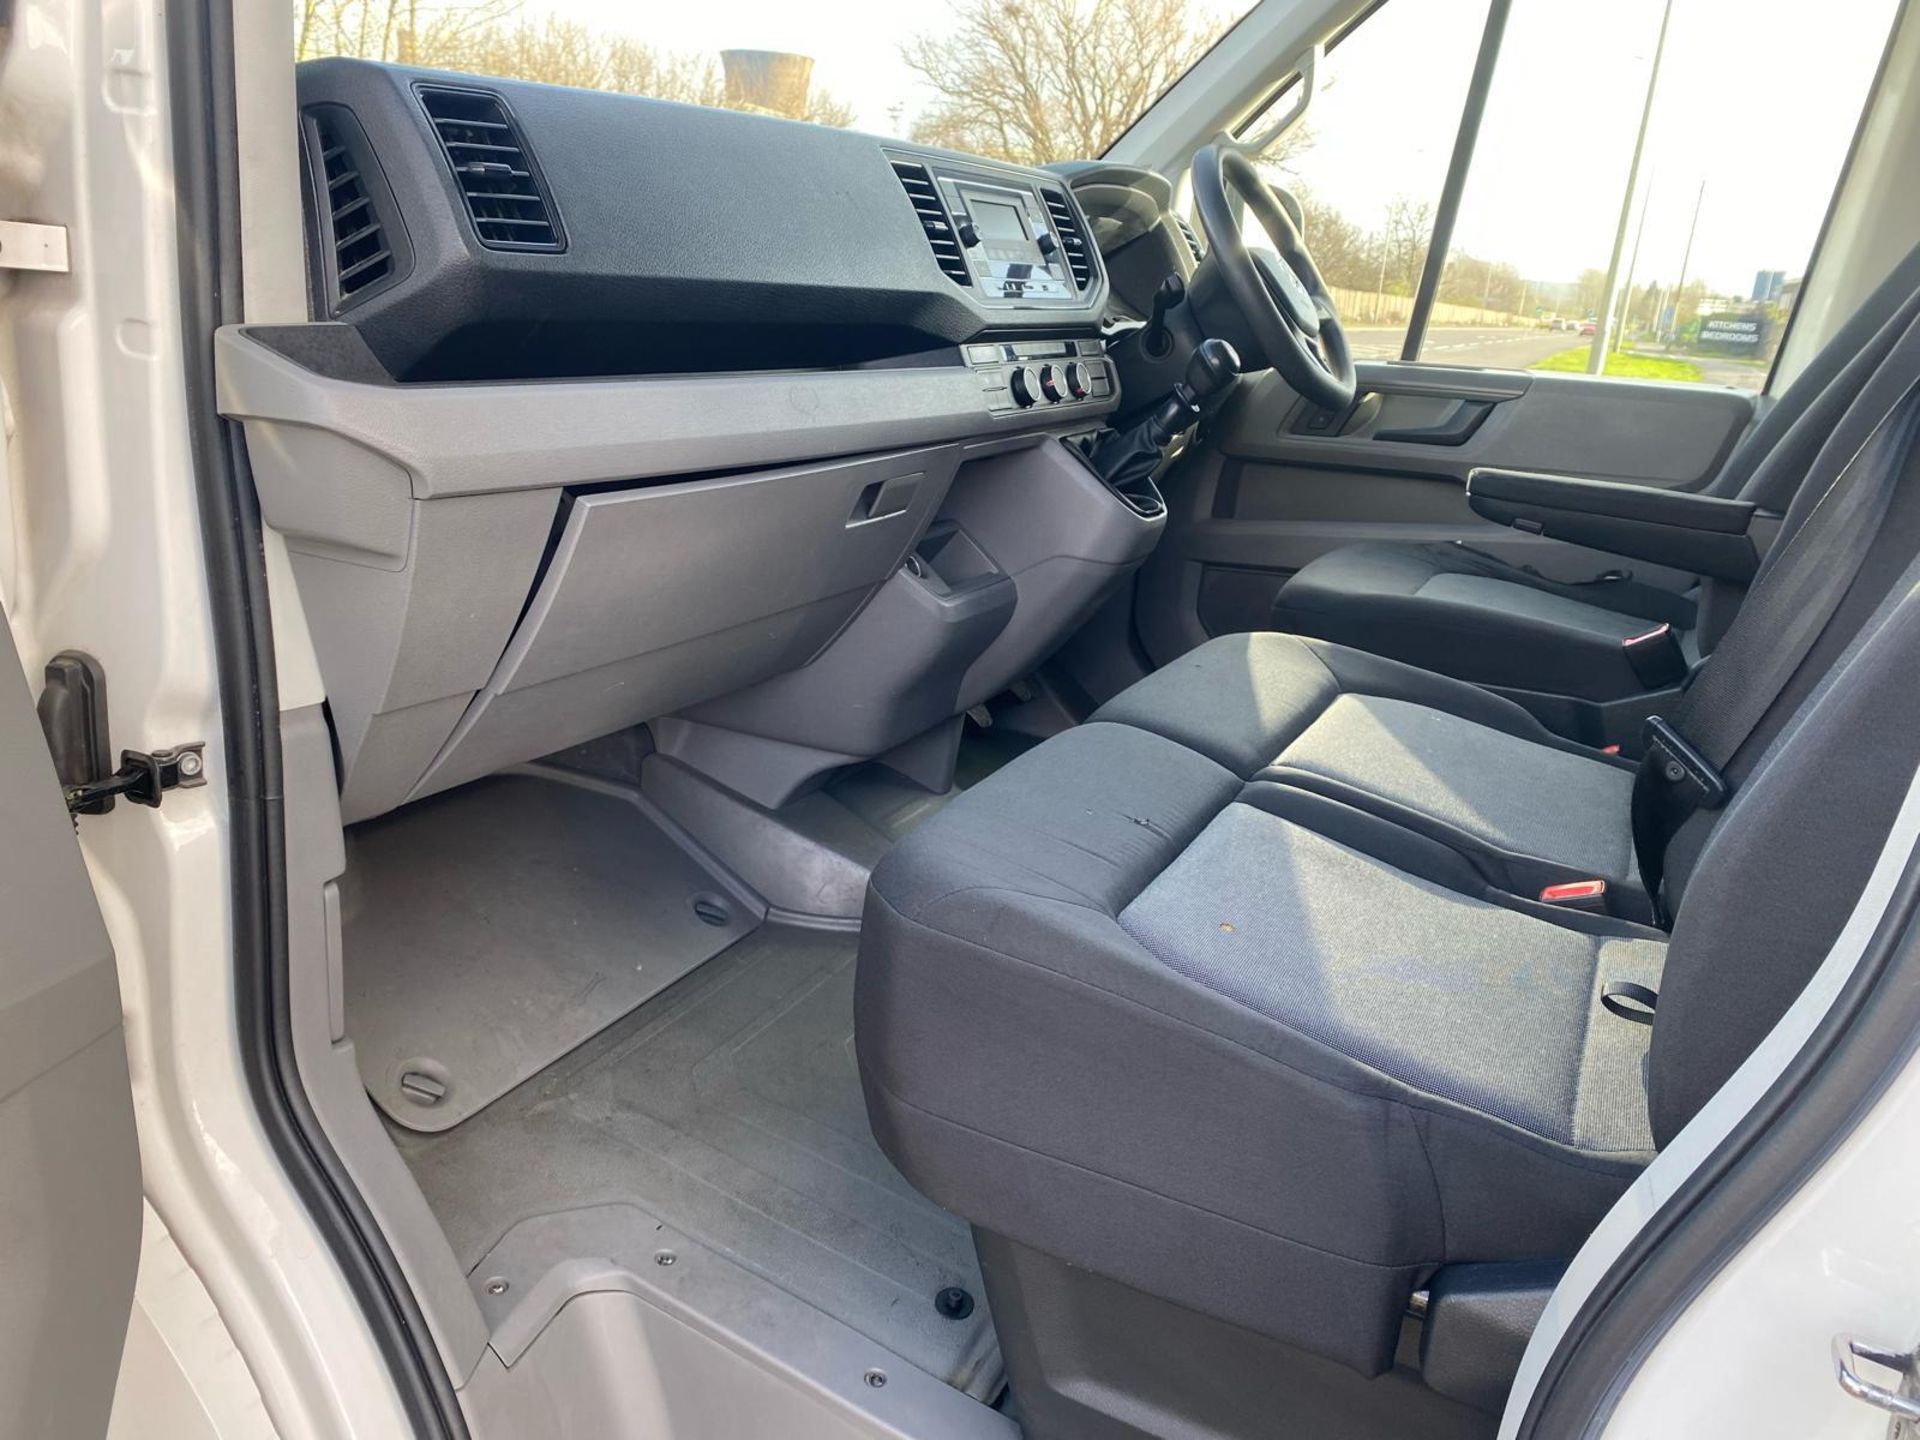 2019 69 VOLKSWAGEN CRAFTER LWB HIGH ROOF PANEL VAN - 87K MILES - PLY LINED. - Image 4 of 12